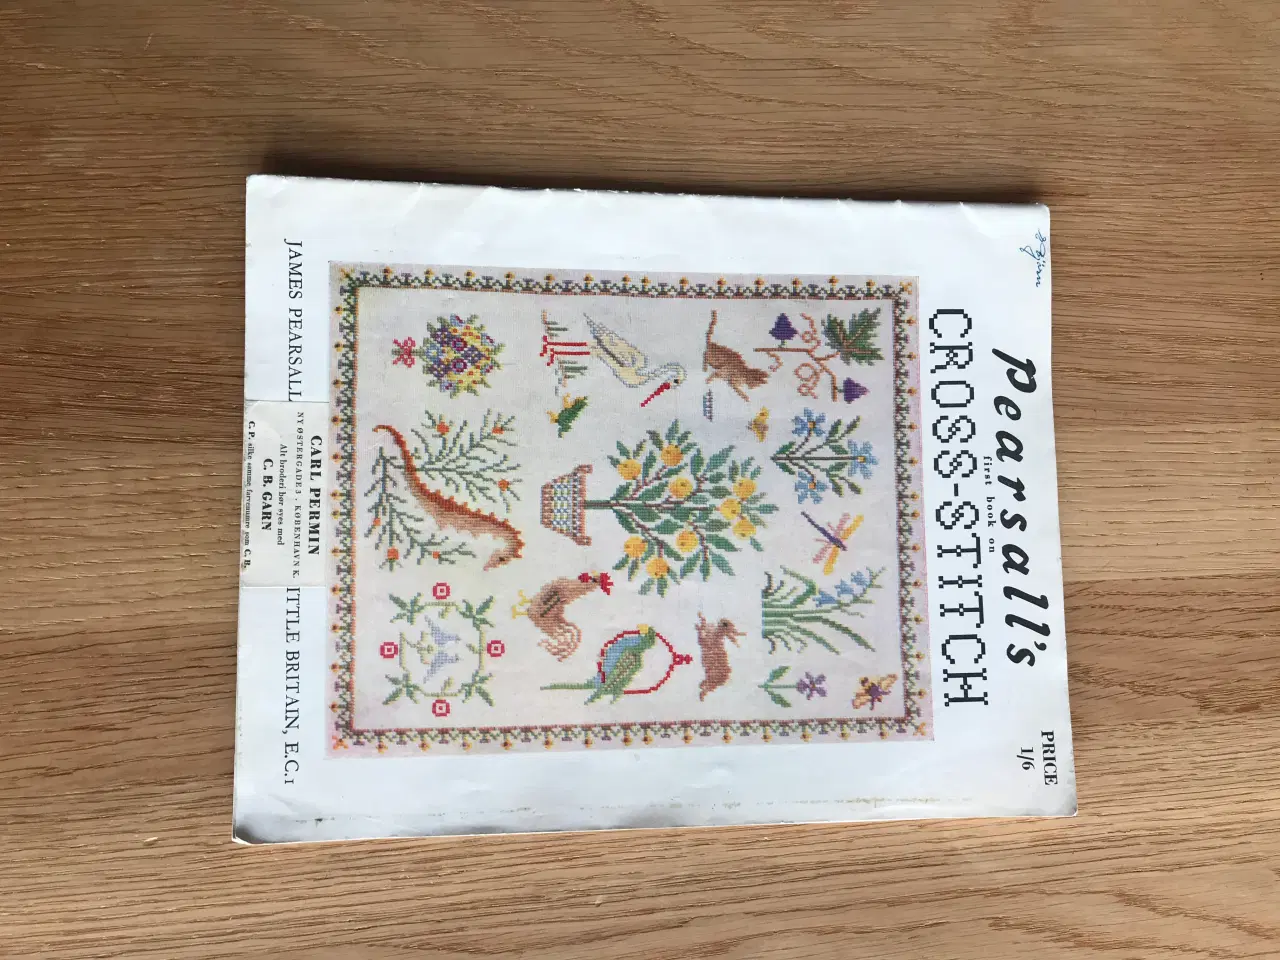 Billede 1 - Pearsall's first book on CROSS-STITCH